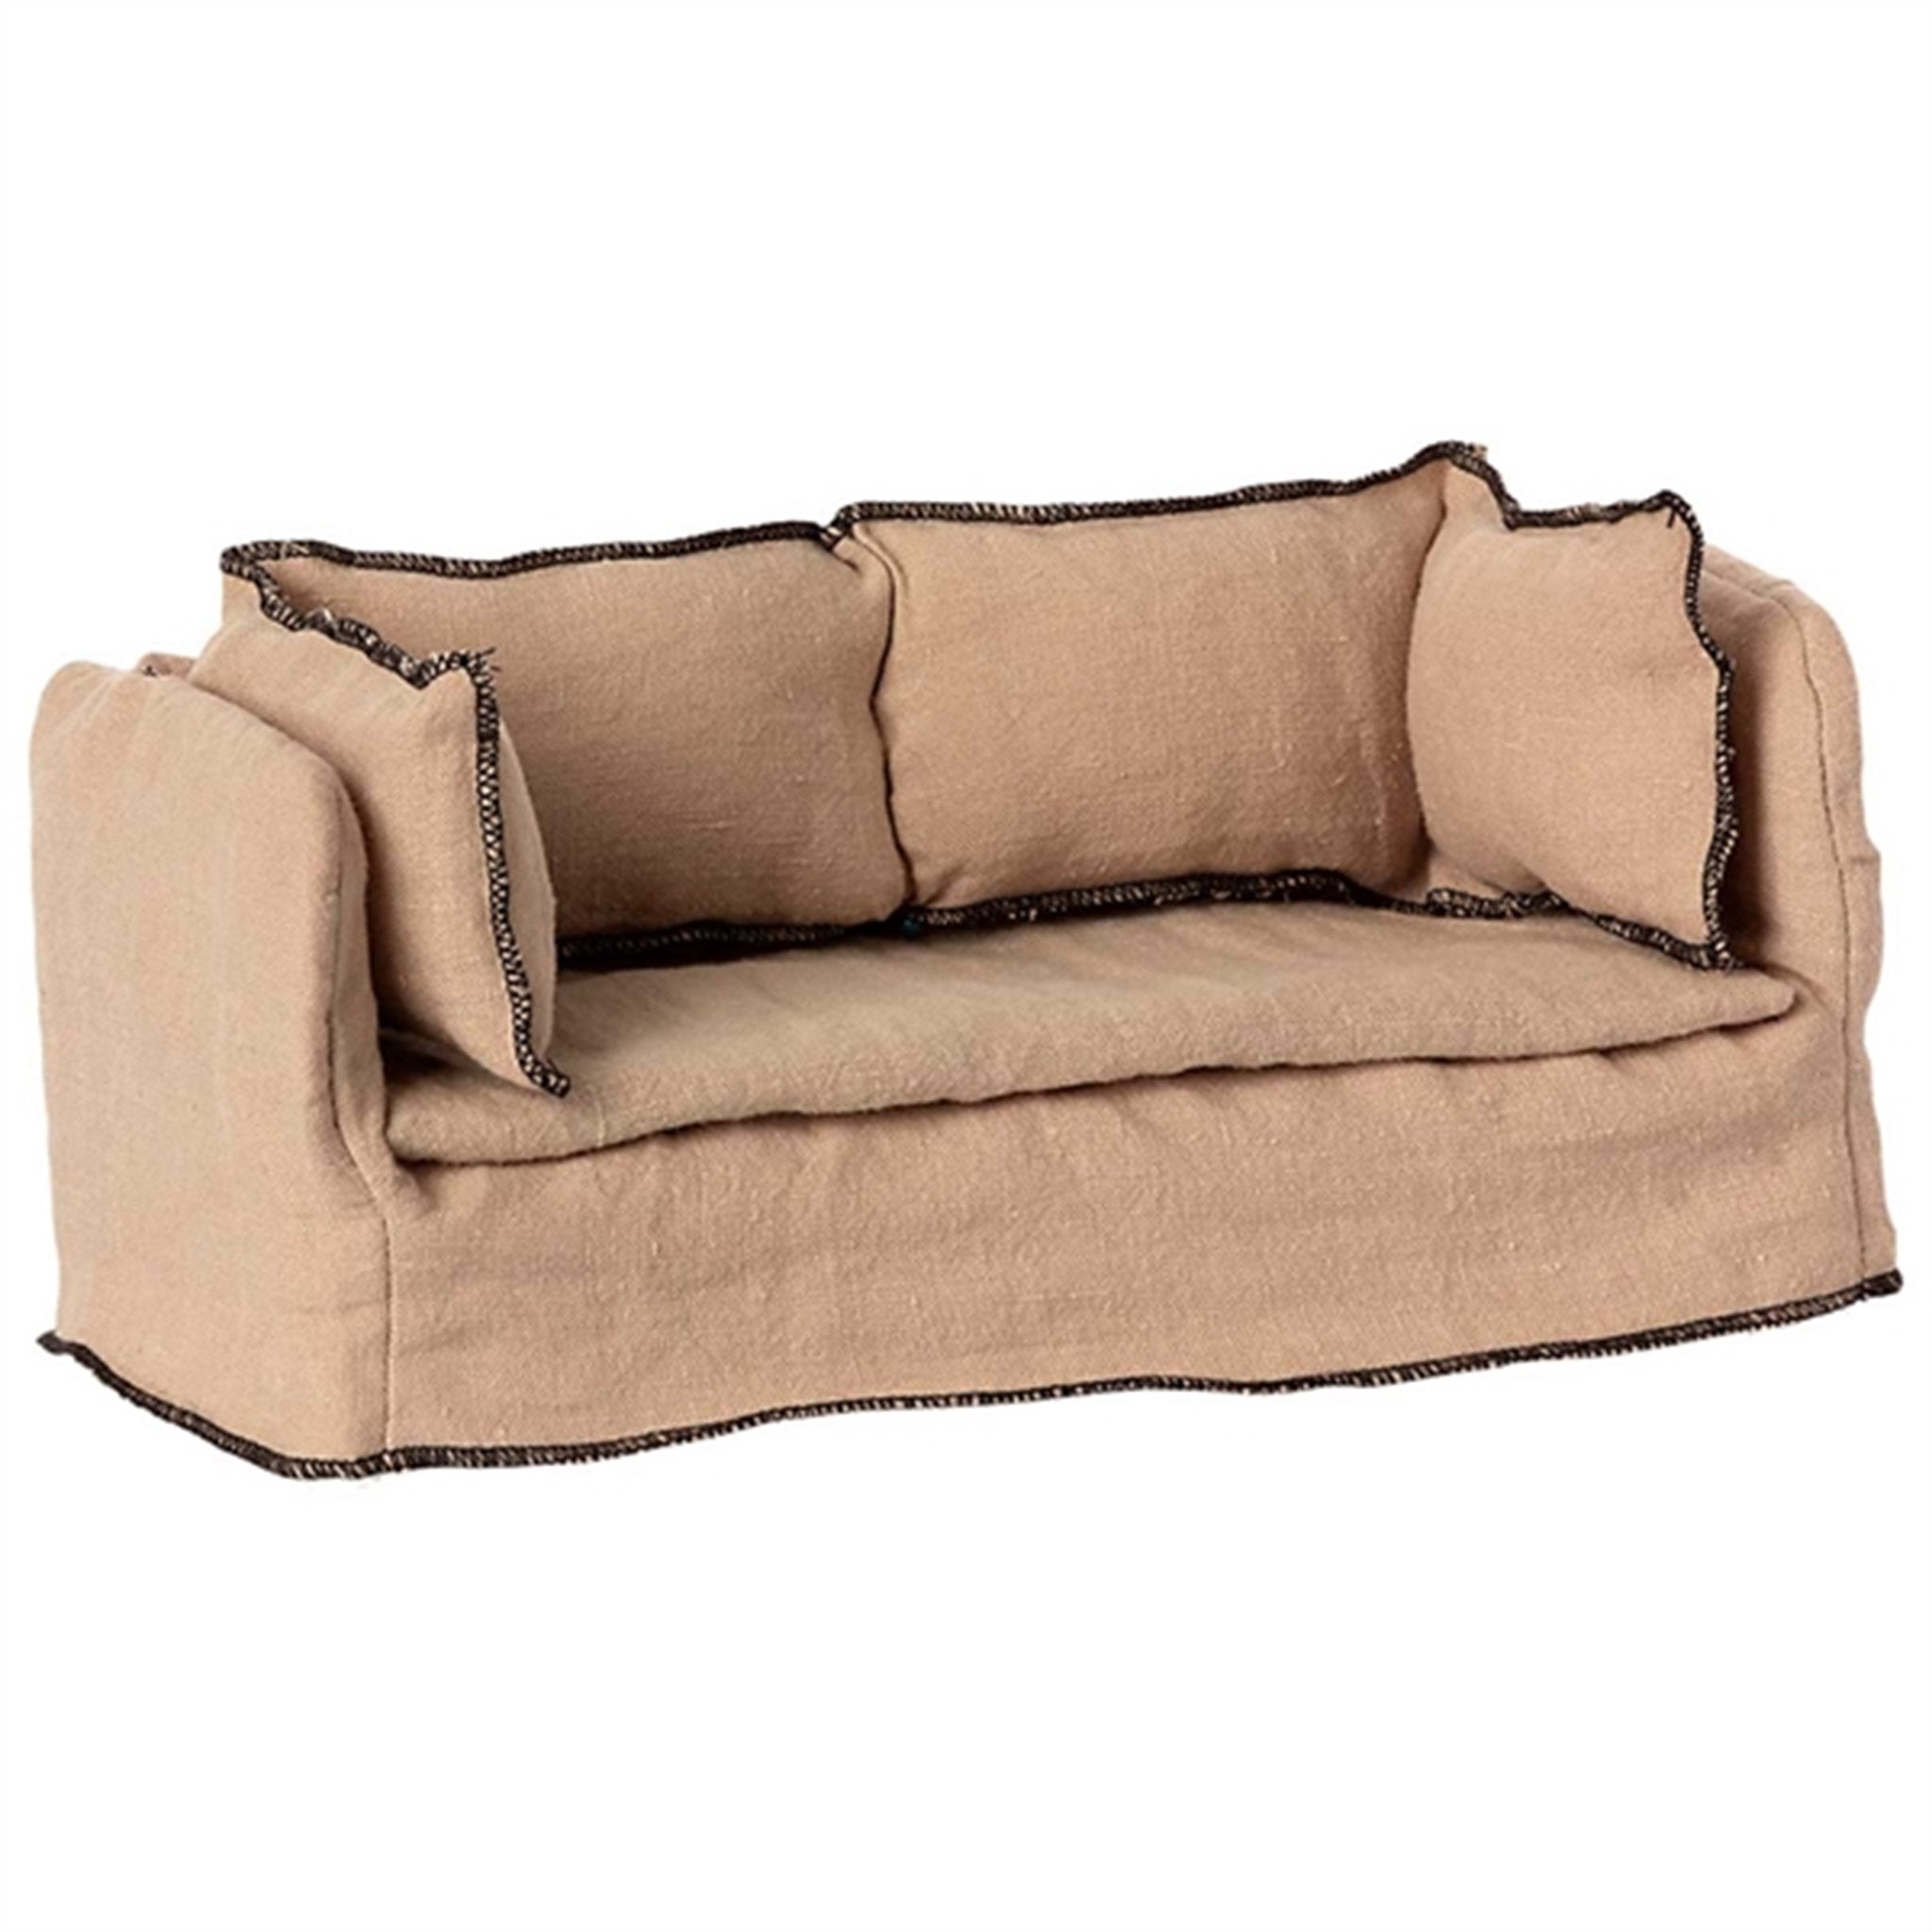 Maileg Miniature Couch 3